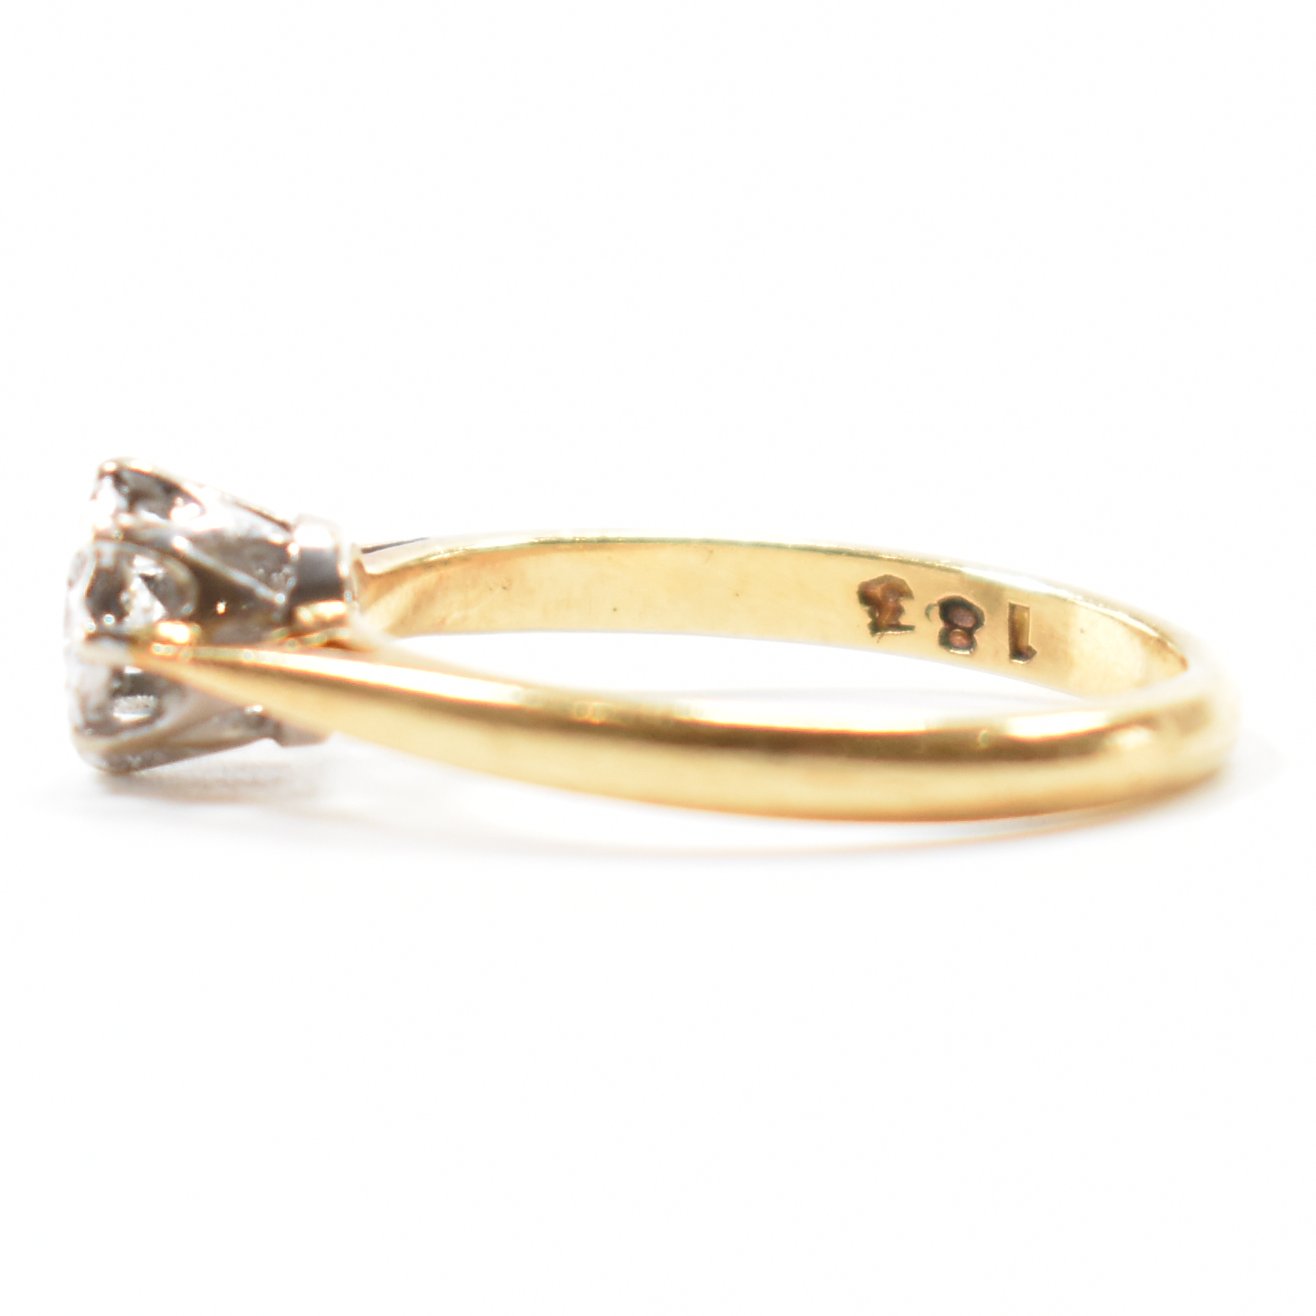 HALLMARKED 18CT GOLD & DIAMOND SOLITAIRE RING - Image 2 of 8